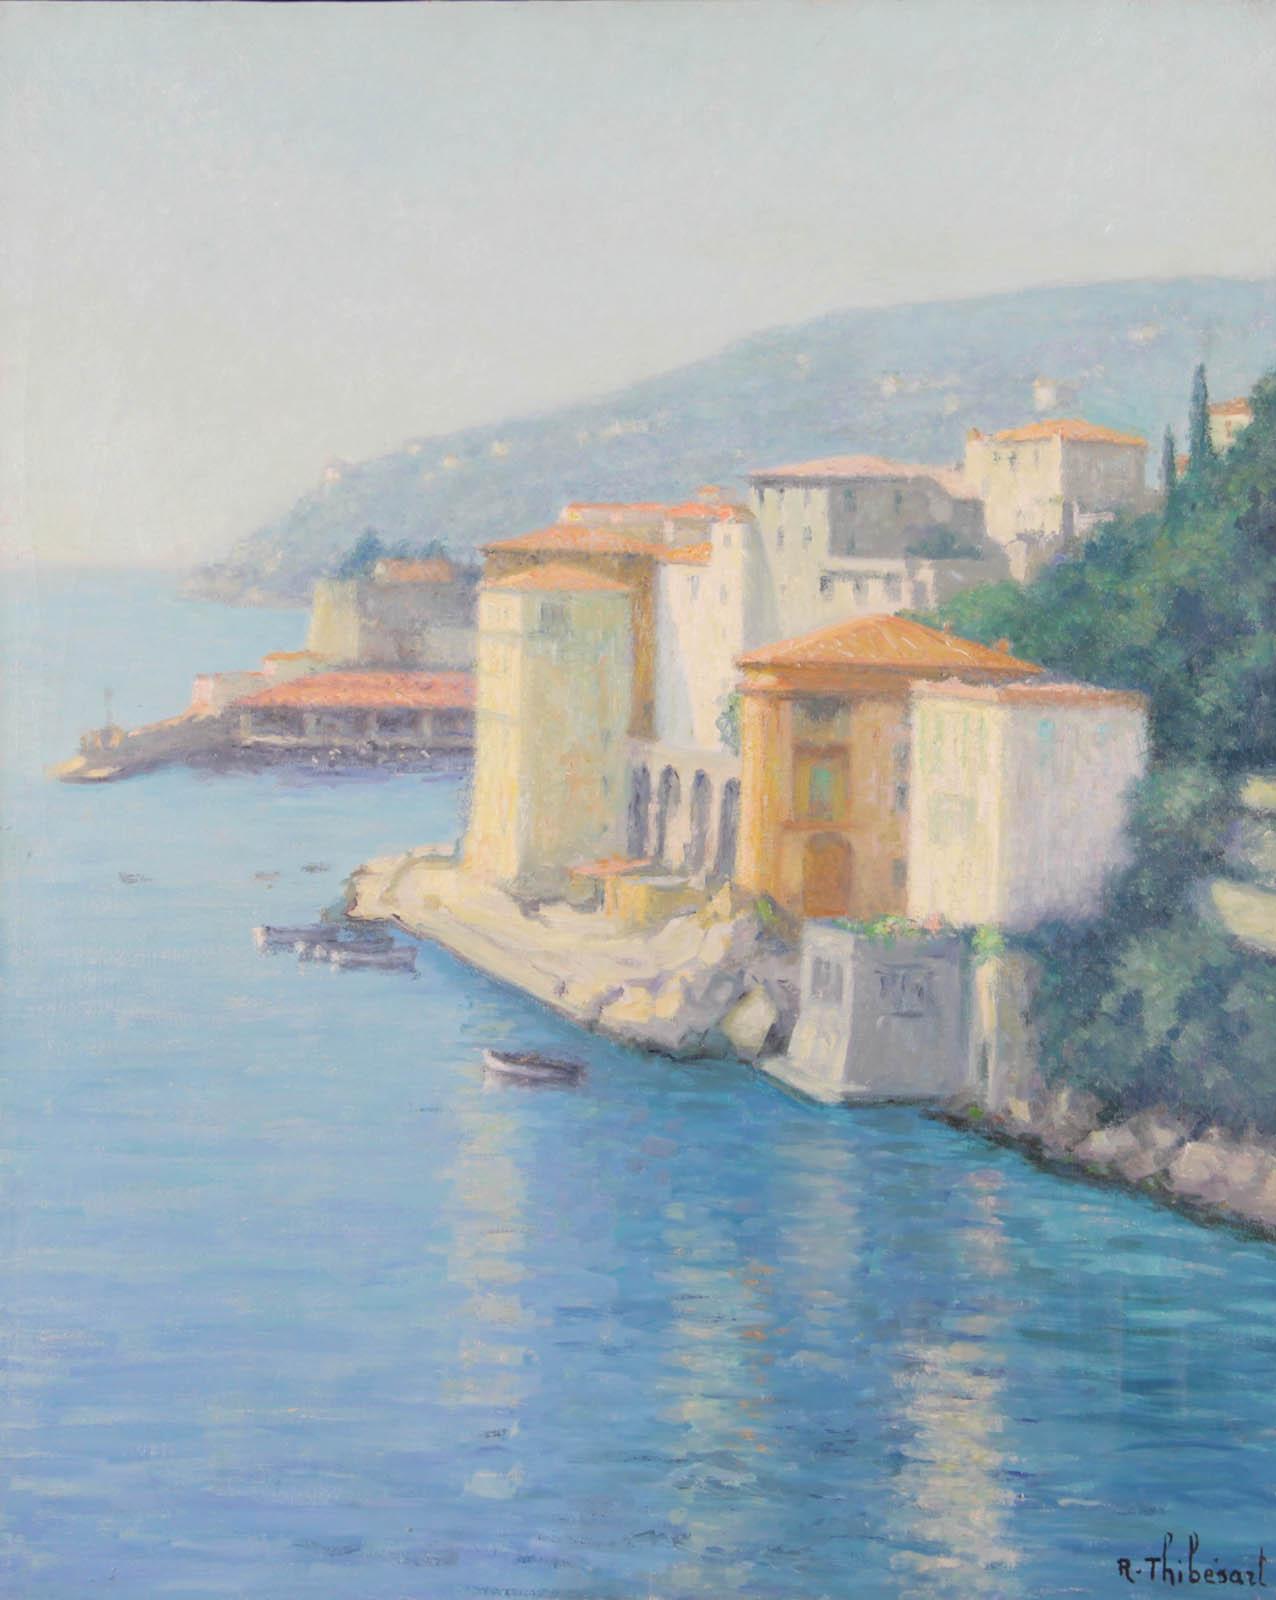 Villefranche sur Mer - Painting by Raymond Thibesart